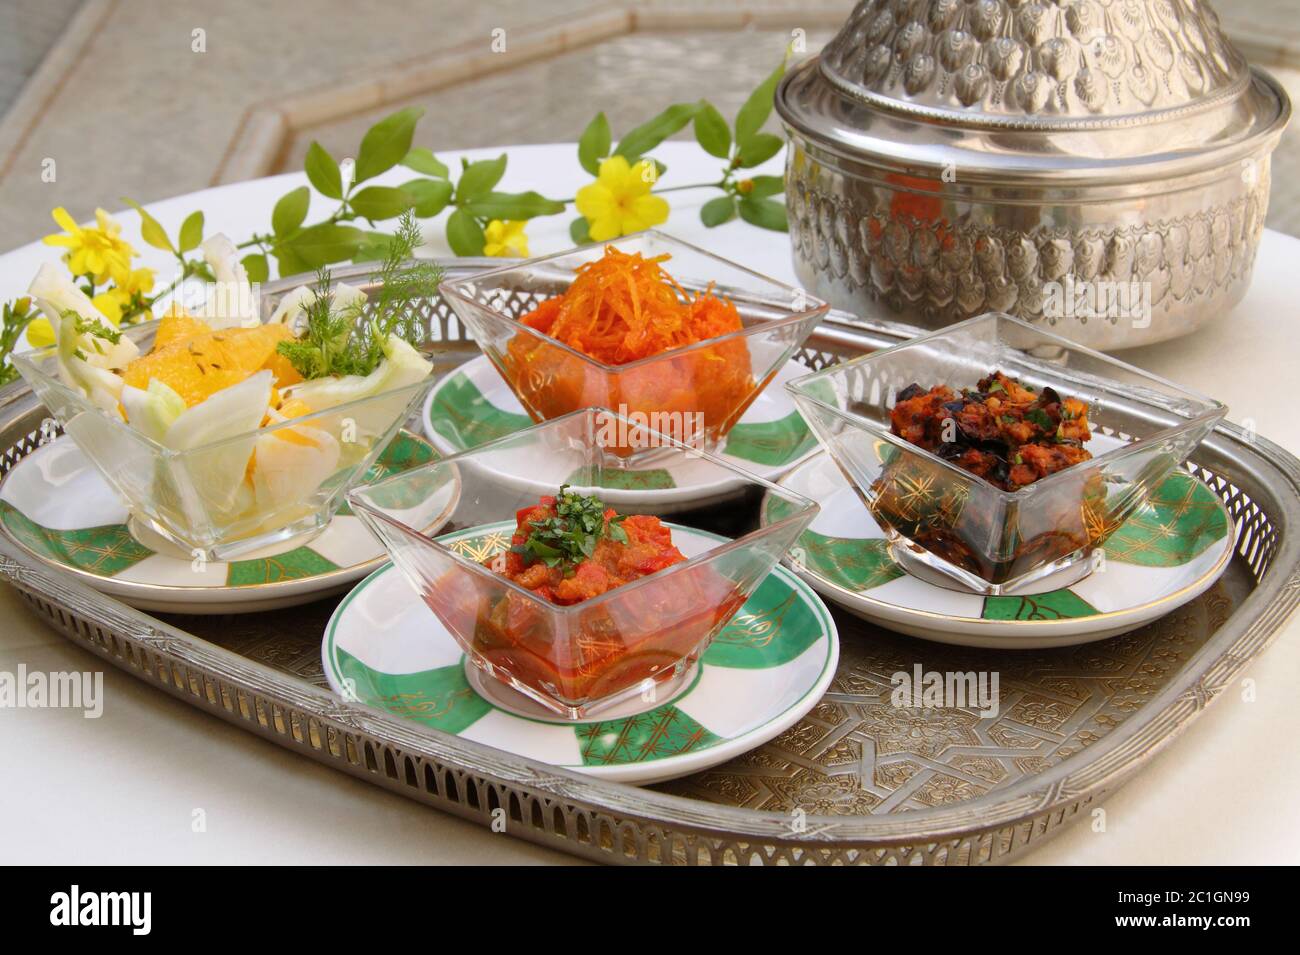 Moroccan food. Selection of cold starters. Stock Photo